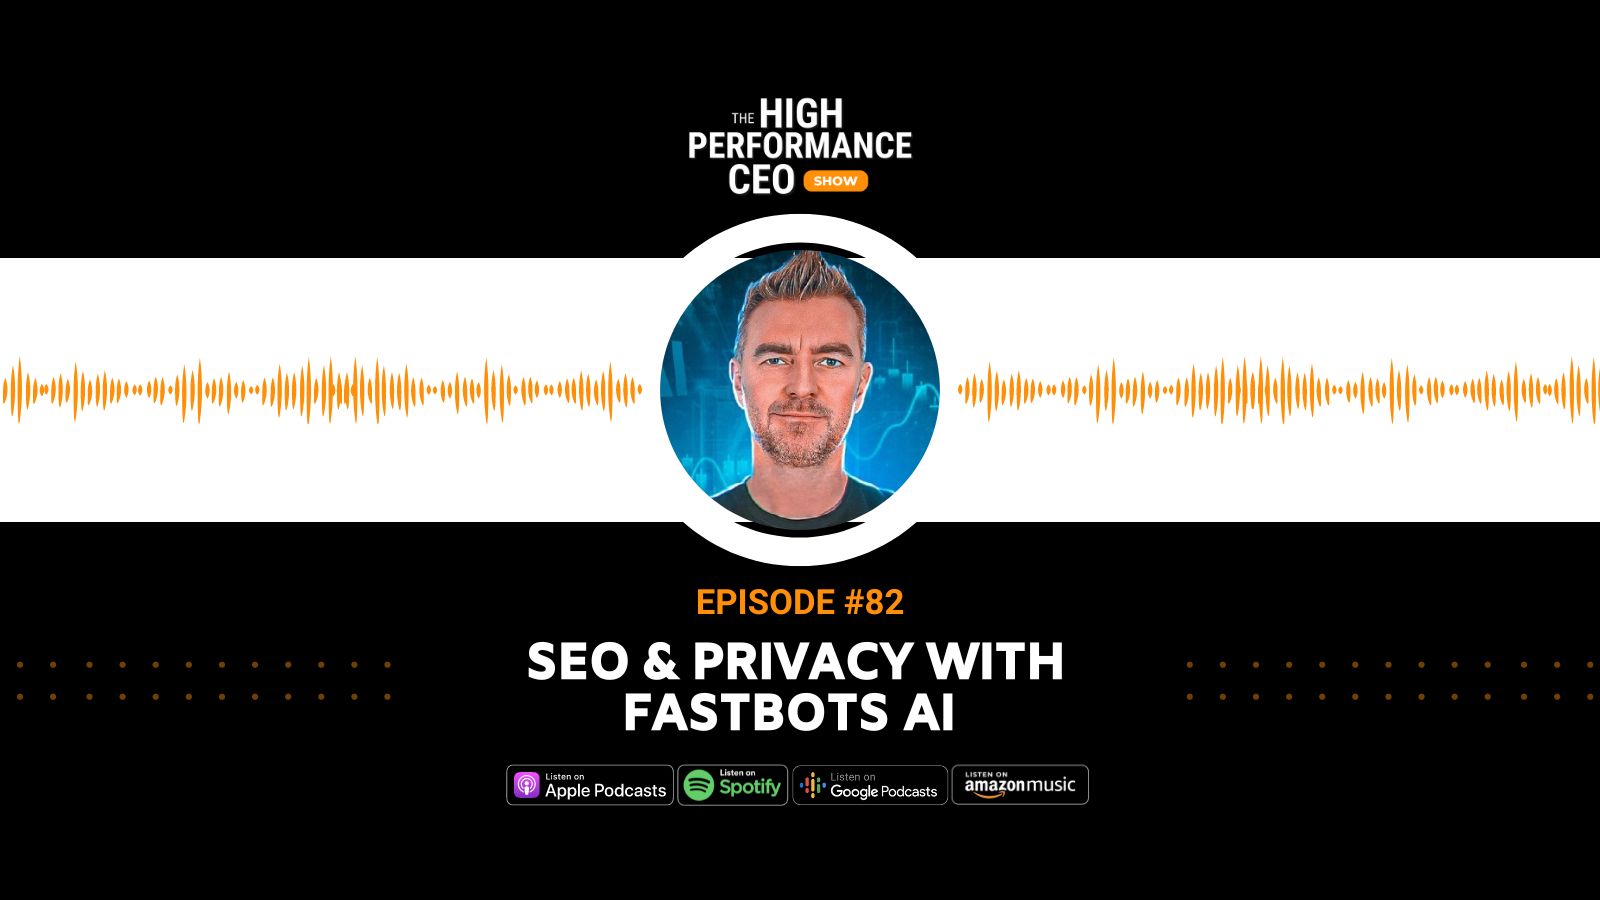 Enhance Your SEO & Privacy with FastBots AI Chatbots